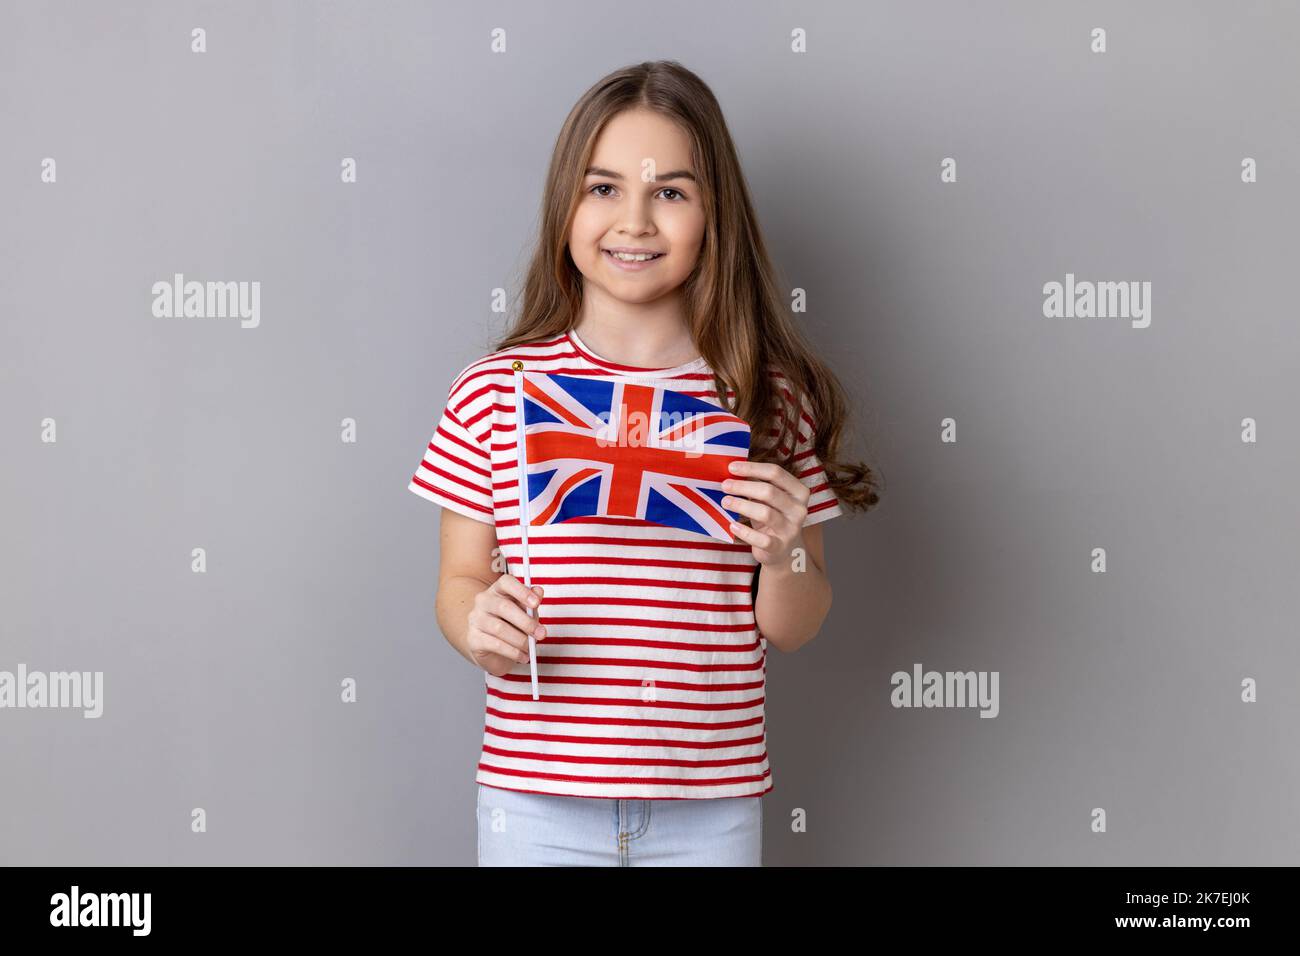 British flag. Portrait of charming smiling little girl wearing striped T-shirt holding flag of United Kingdom looking at camera with positive expression. Indoor studio shot isolated on gray background Stock Photo